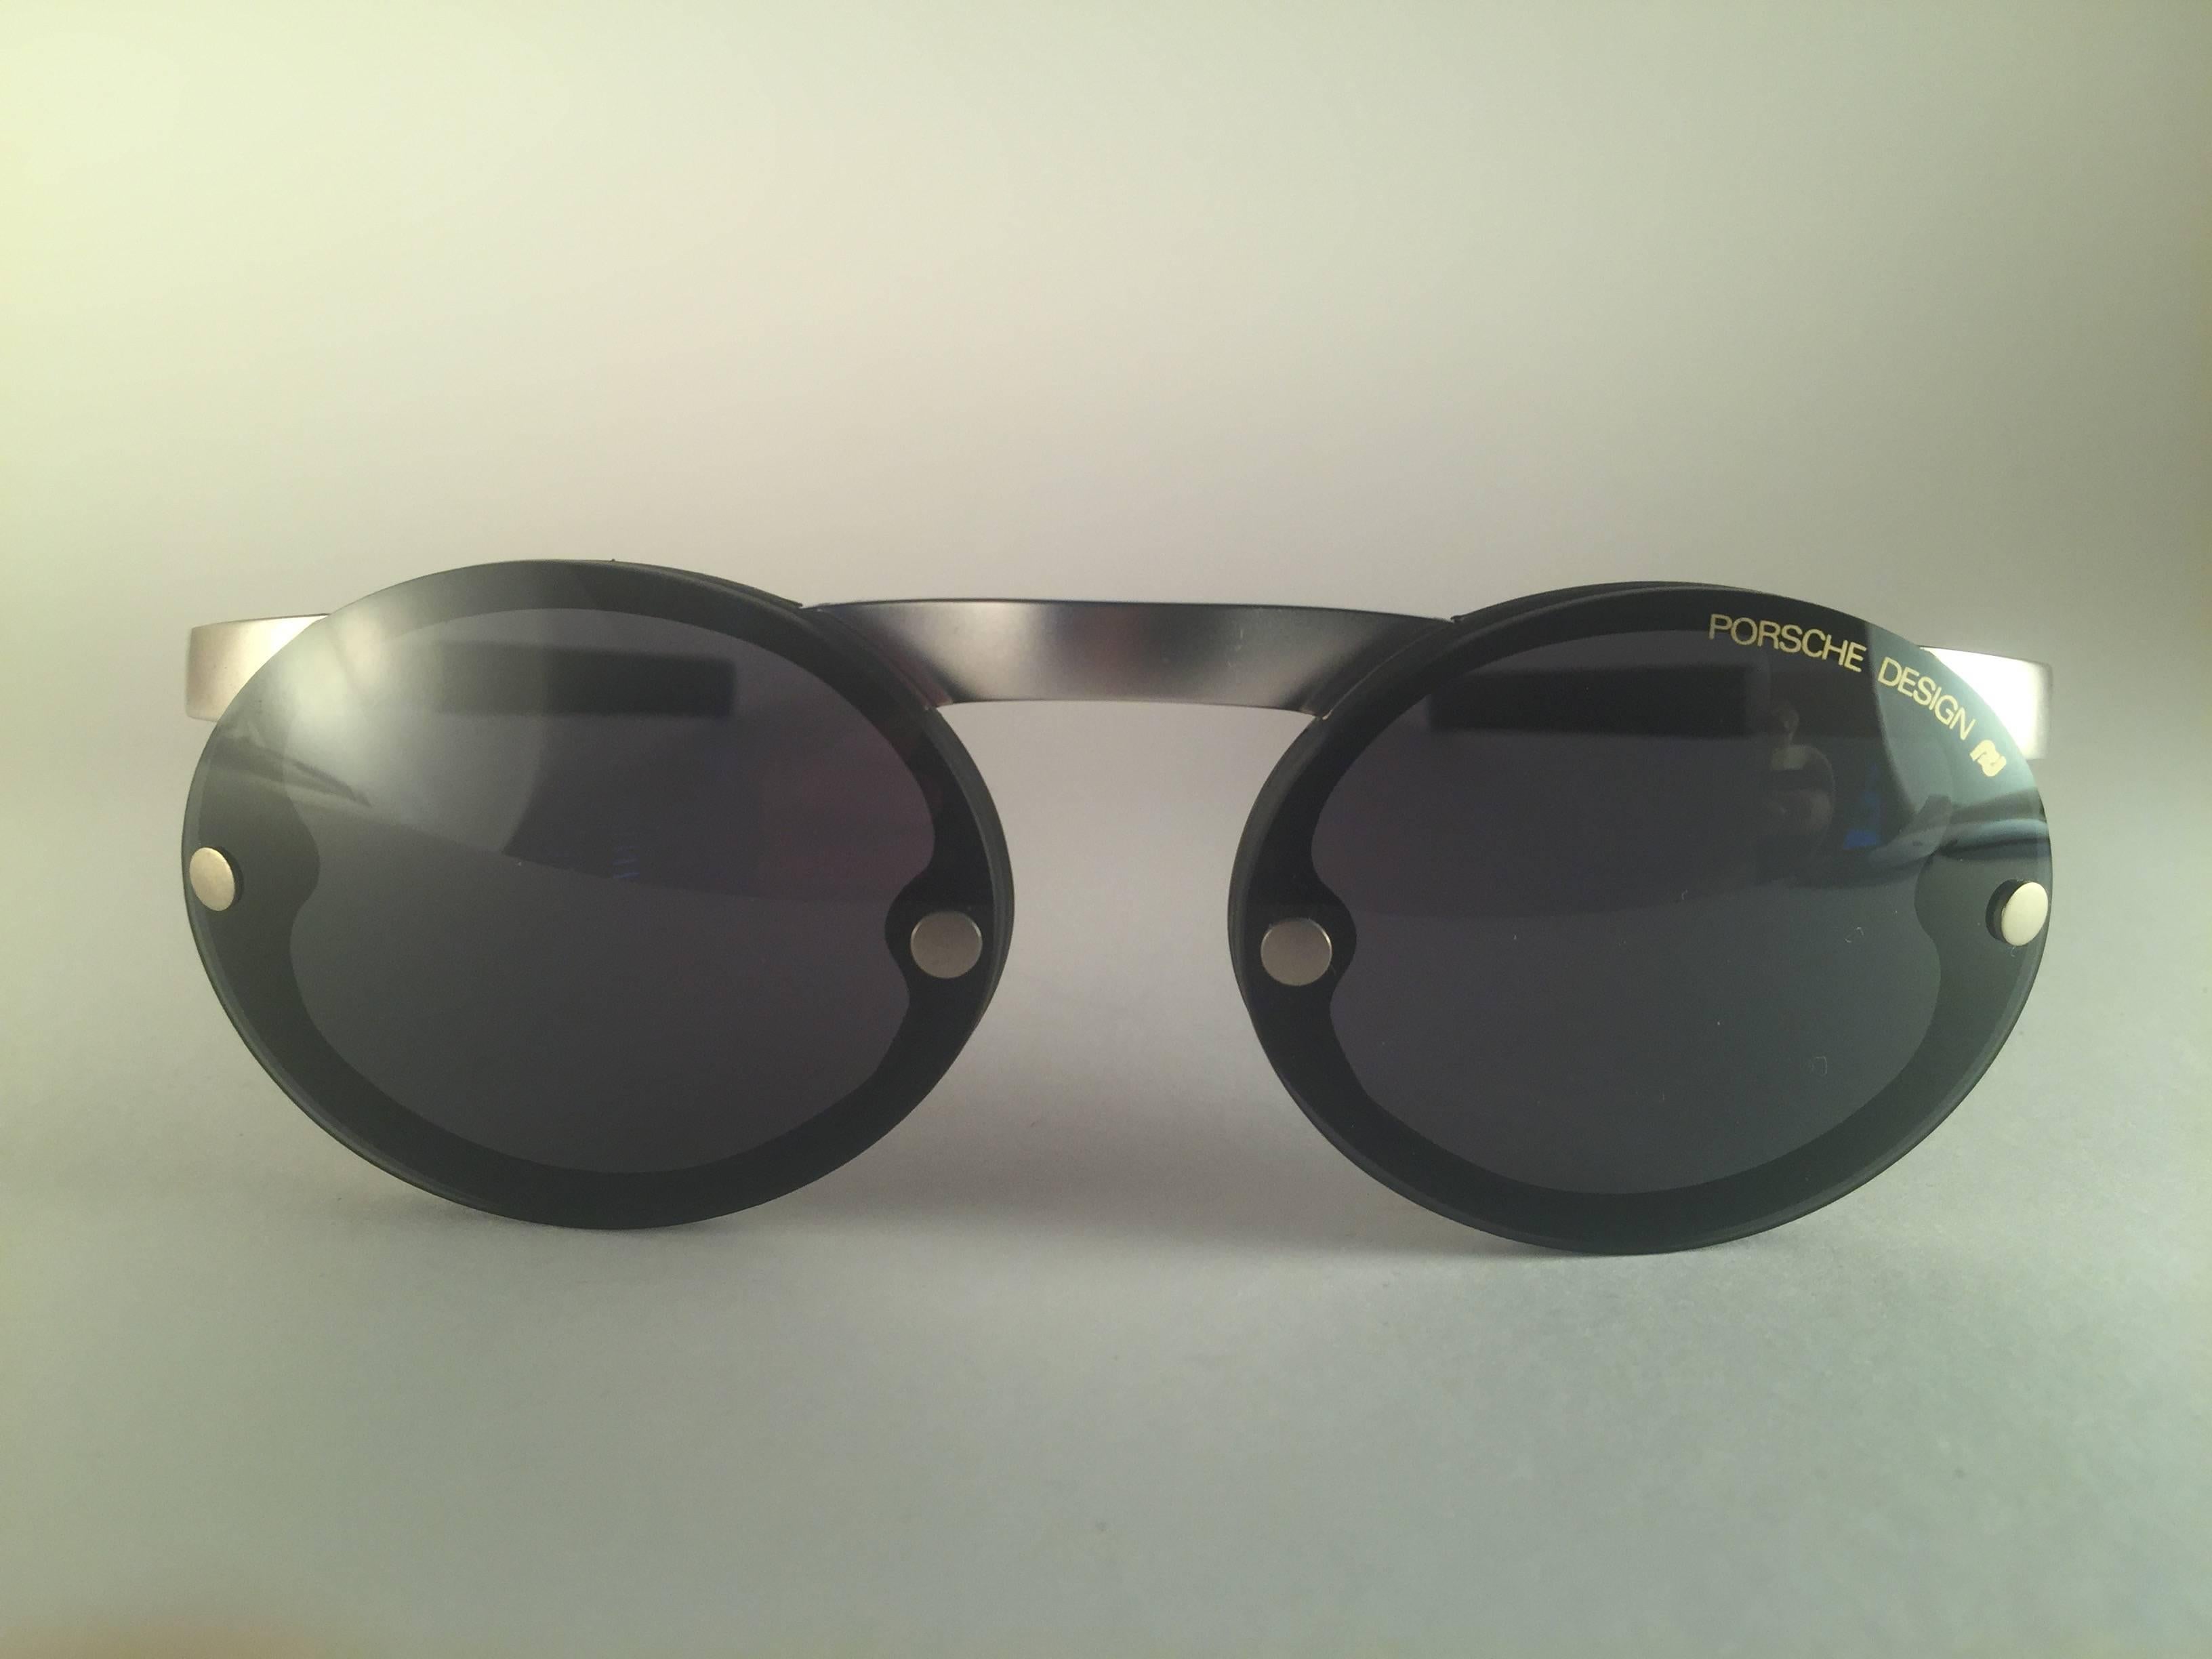 Mint 1980's Porsche Design 5694 Silver Matte frame. 
Amazing craftsmanship and quality.  
Comes with the original black Porsche hard case thats has some wear on it due to nearly 40 years of storage. 
New, never worn. Made in Austria.